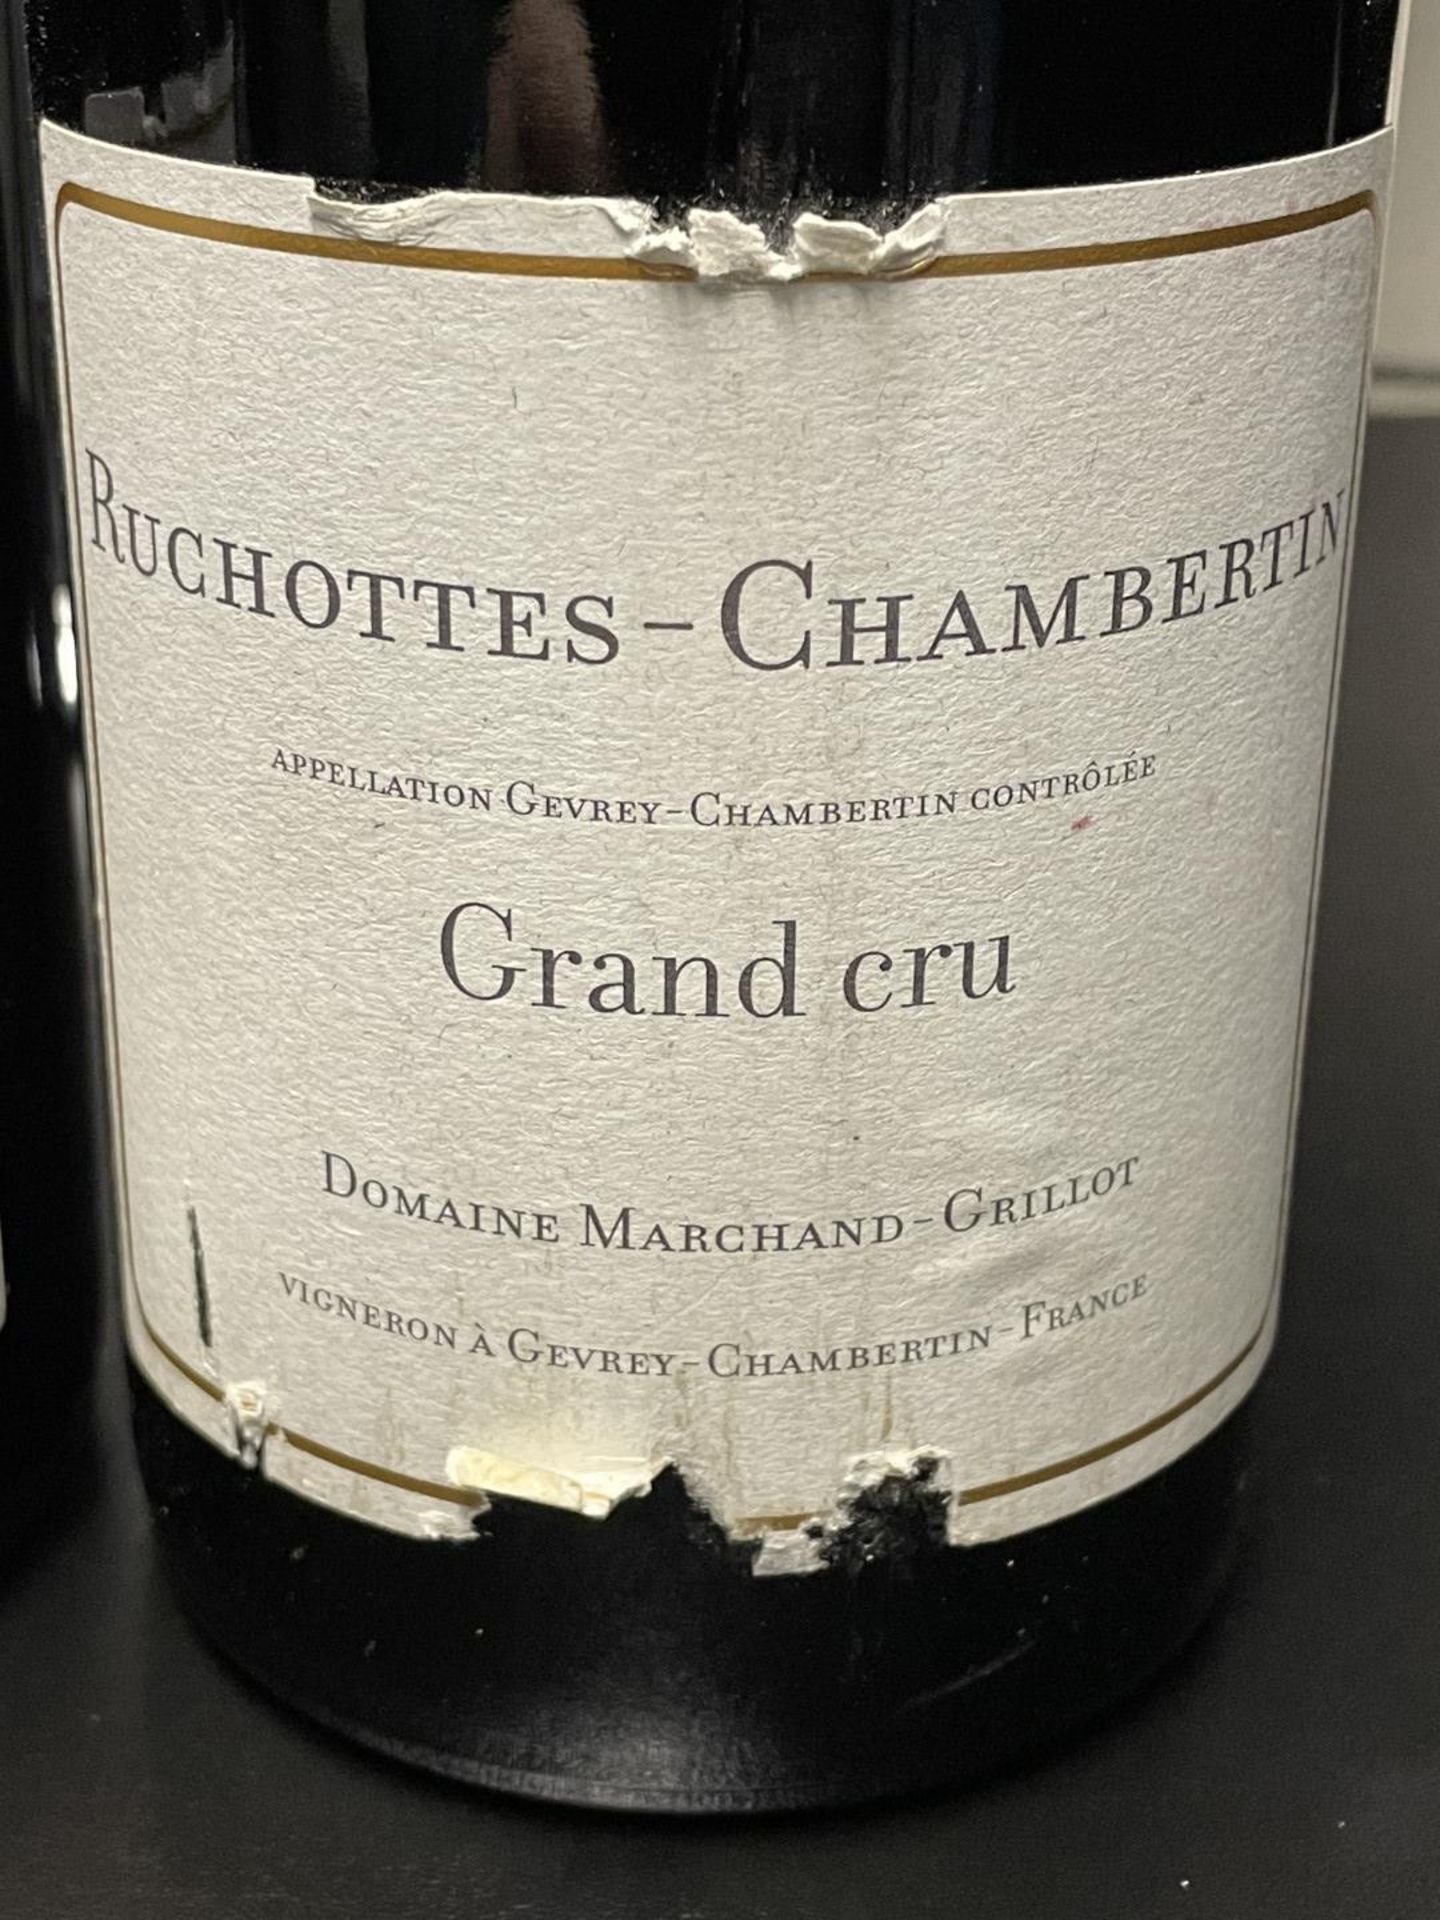 2 x Bottle of 2017 Ruchottes - Chambertin Grand Cru Domaine Marchand - Grillot - Red Wine - RRP £750 - Image 6 of 8